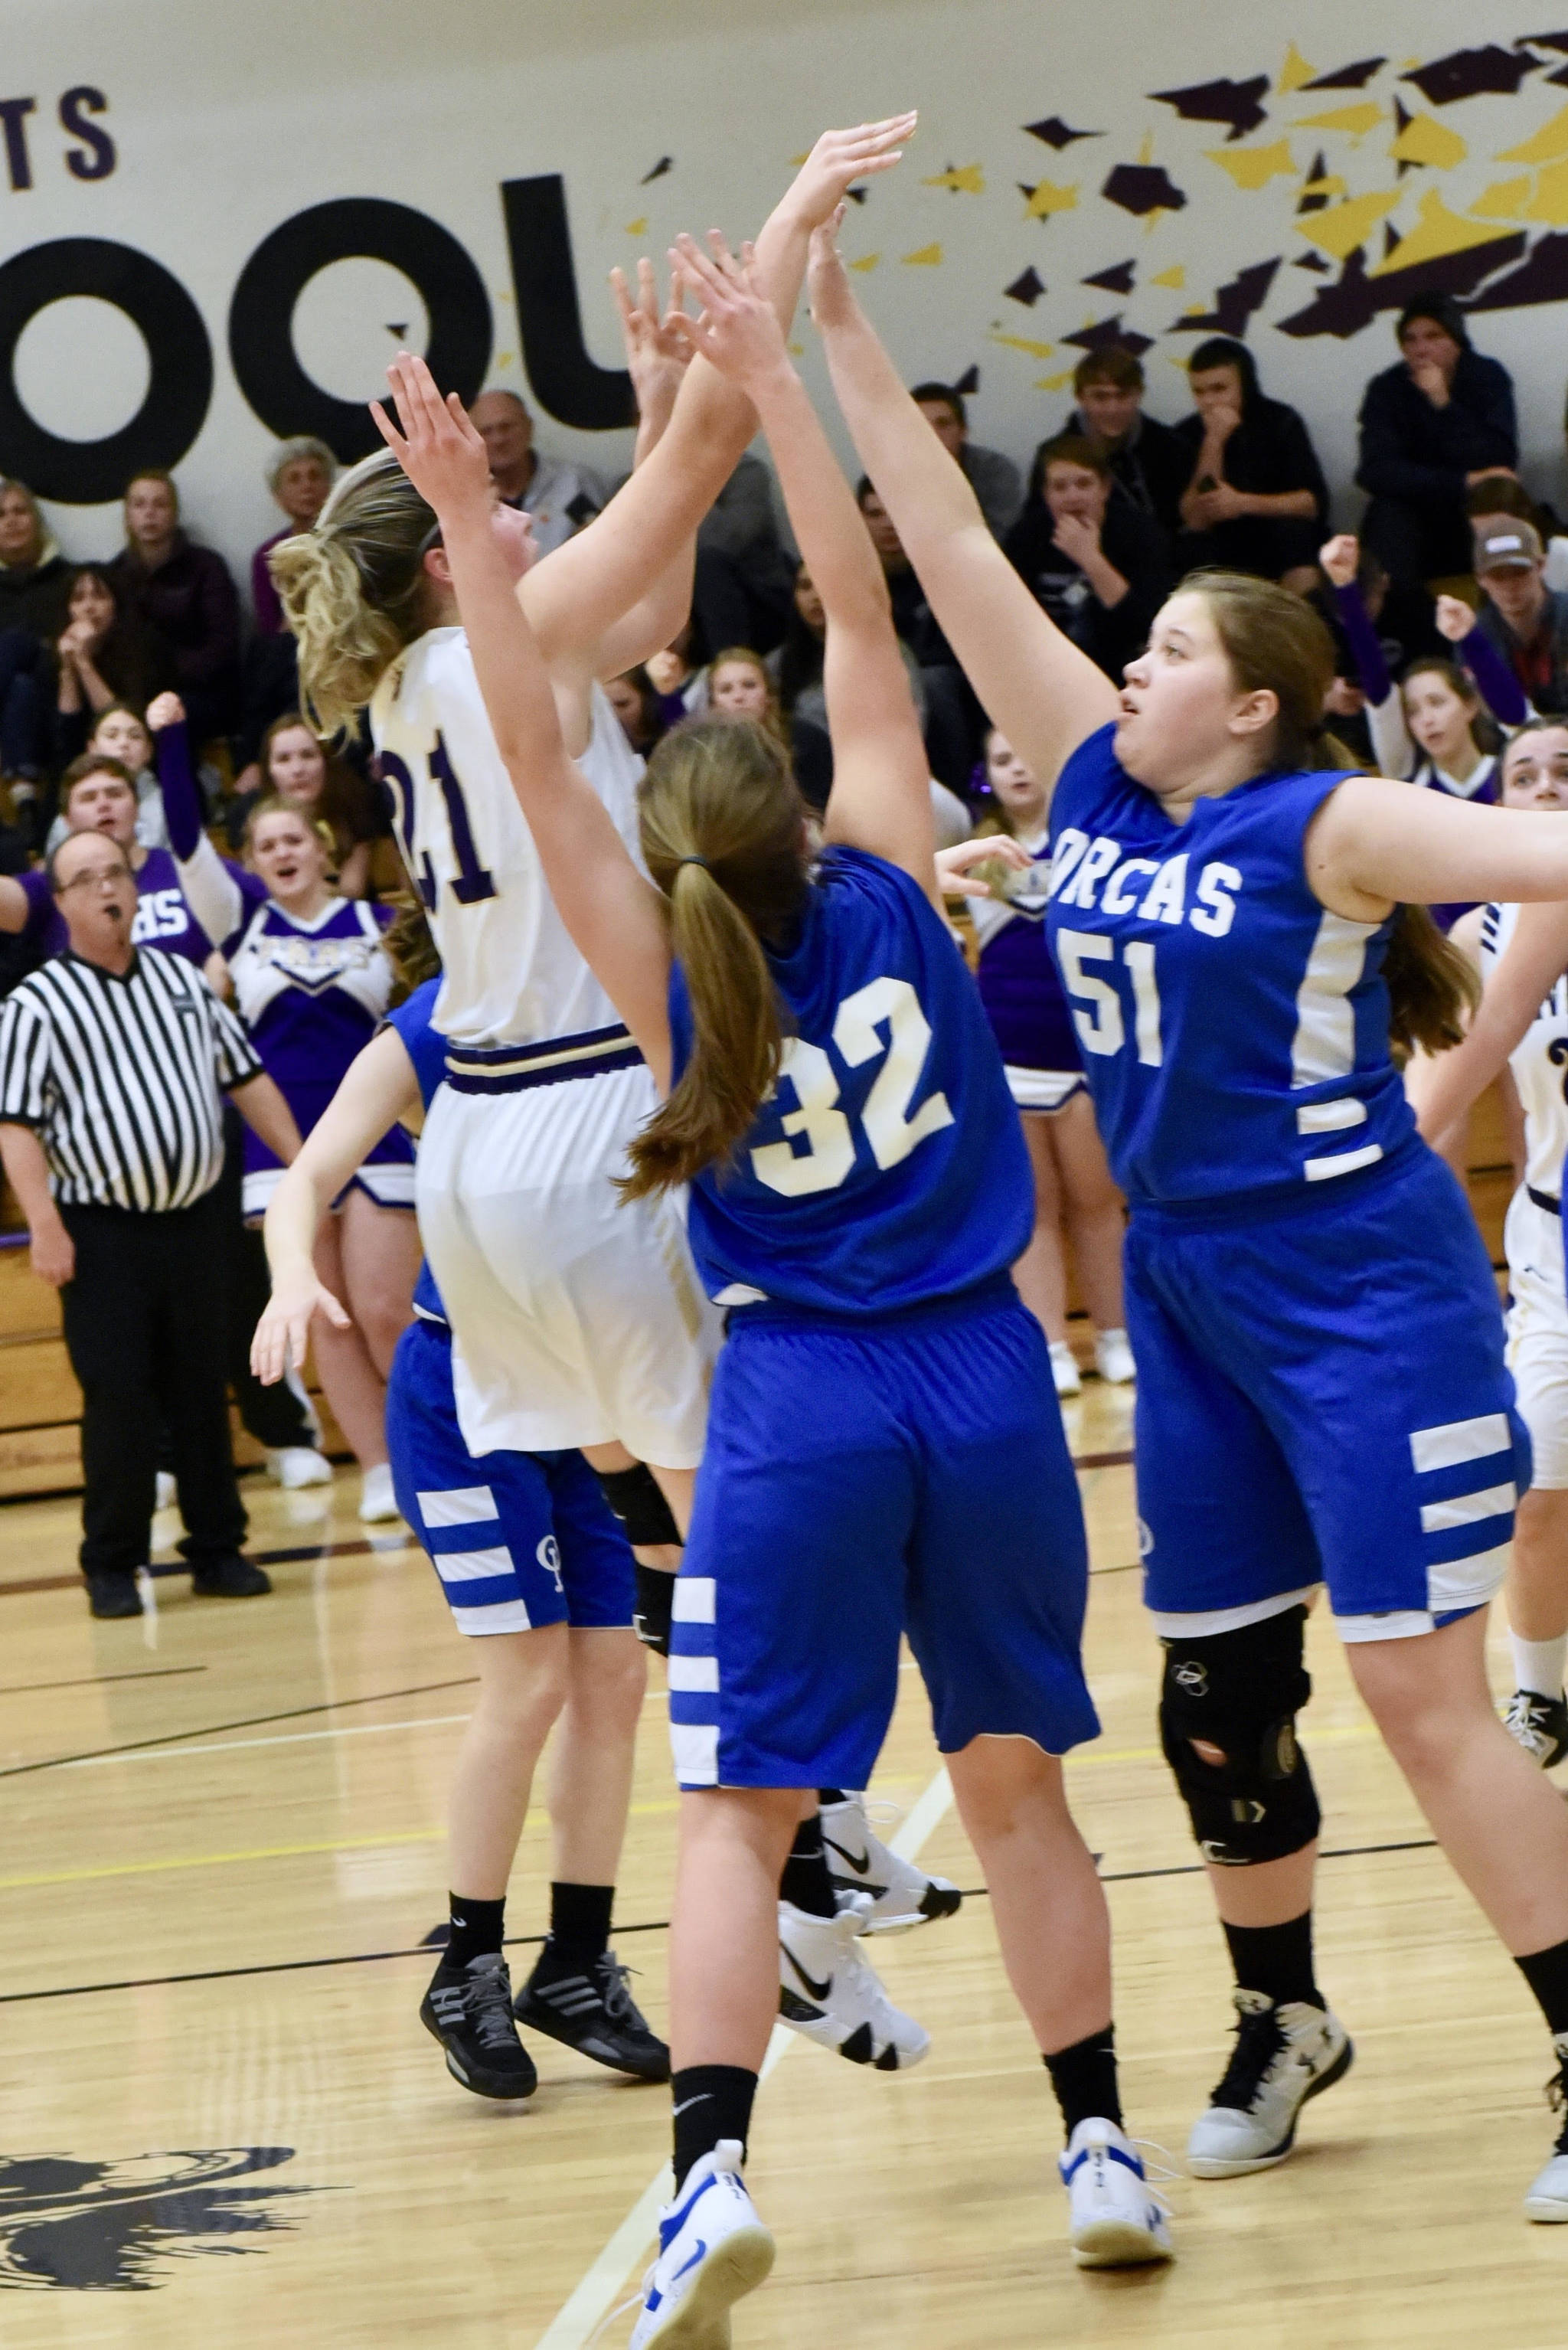 Contributed photo/John Stimpson                                Bailee Lambright brings in 2 points against Orcas defenders.